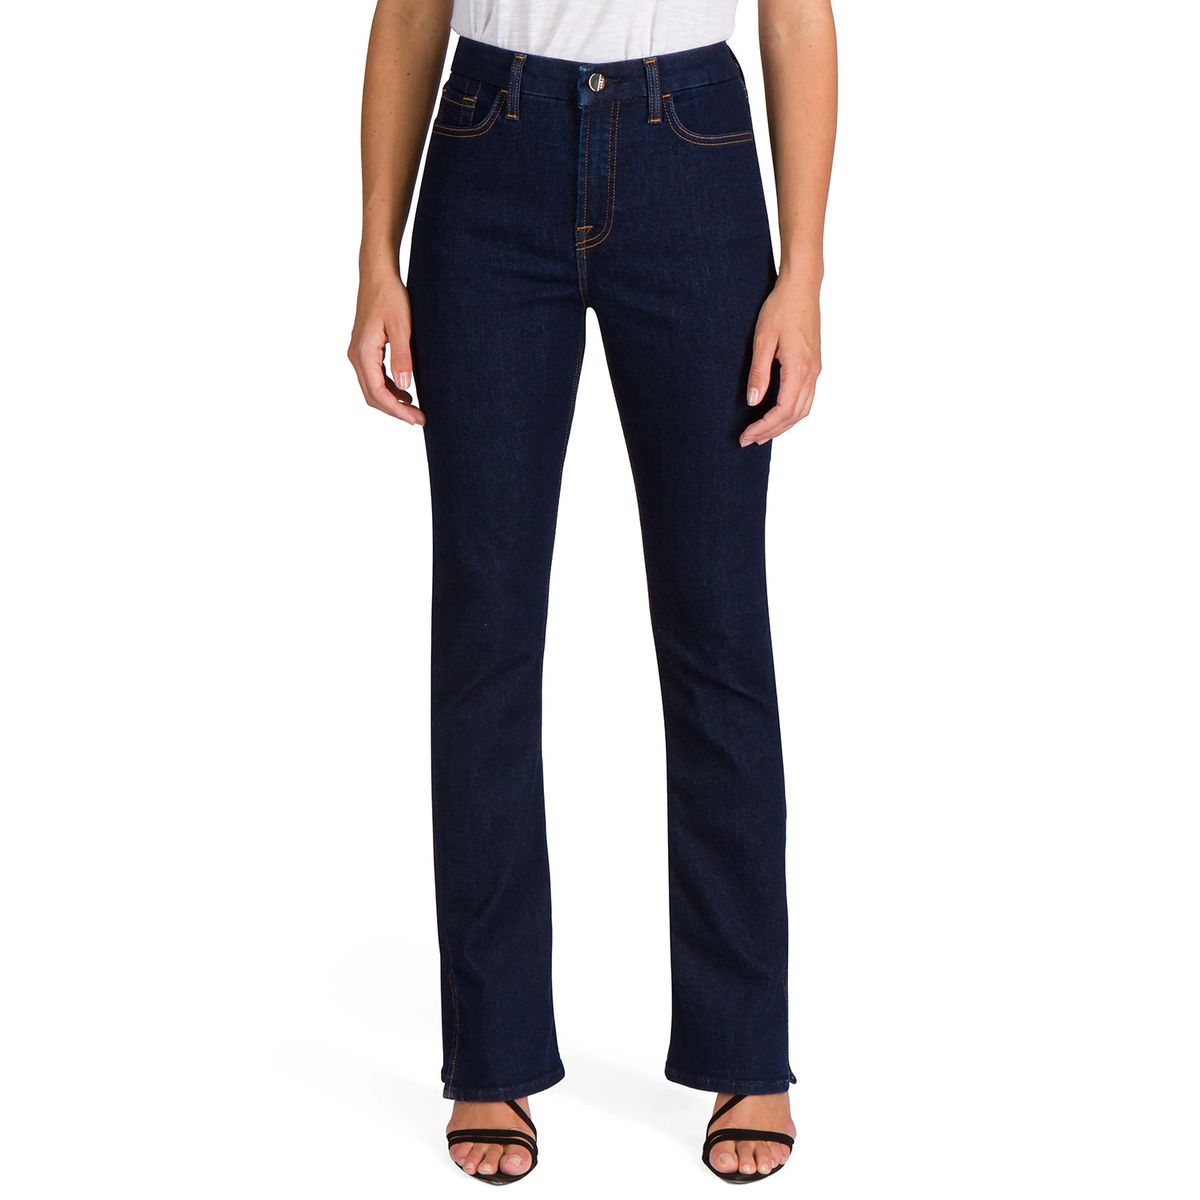 Kelly Ripa-Approved Jen7 by 7 for All Mankind Jeans at Nordstrom | InStyle